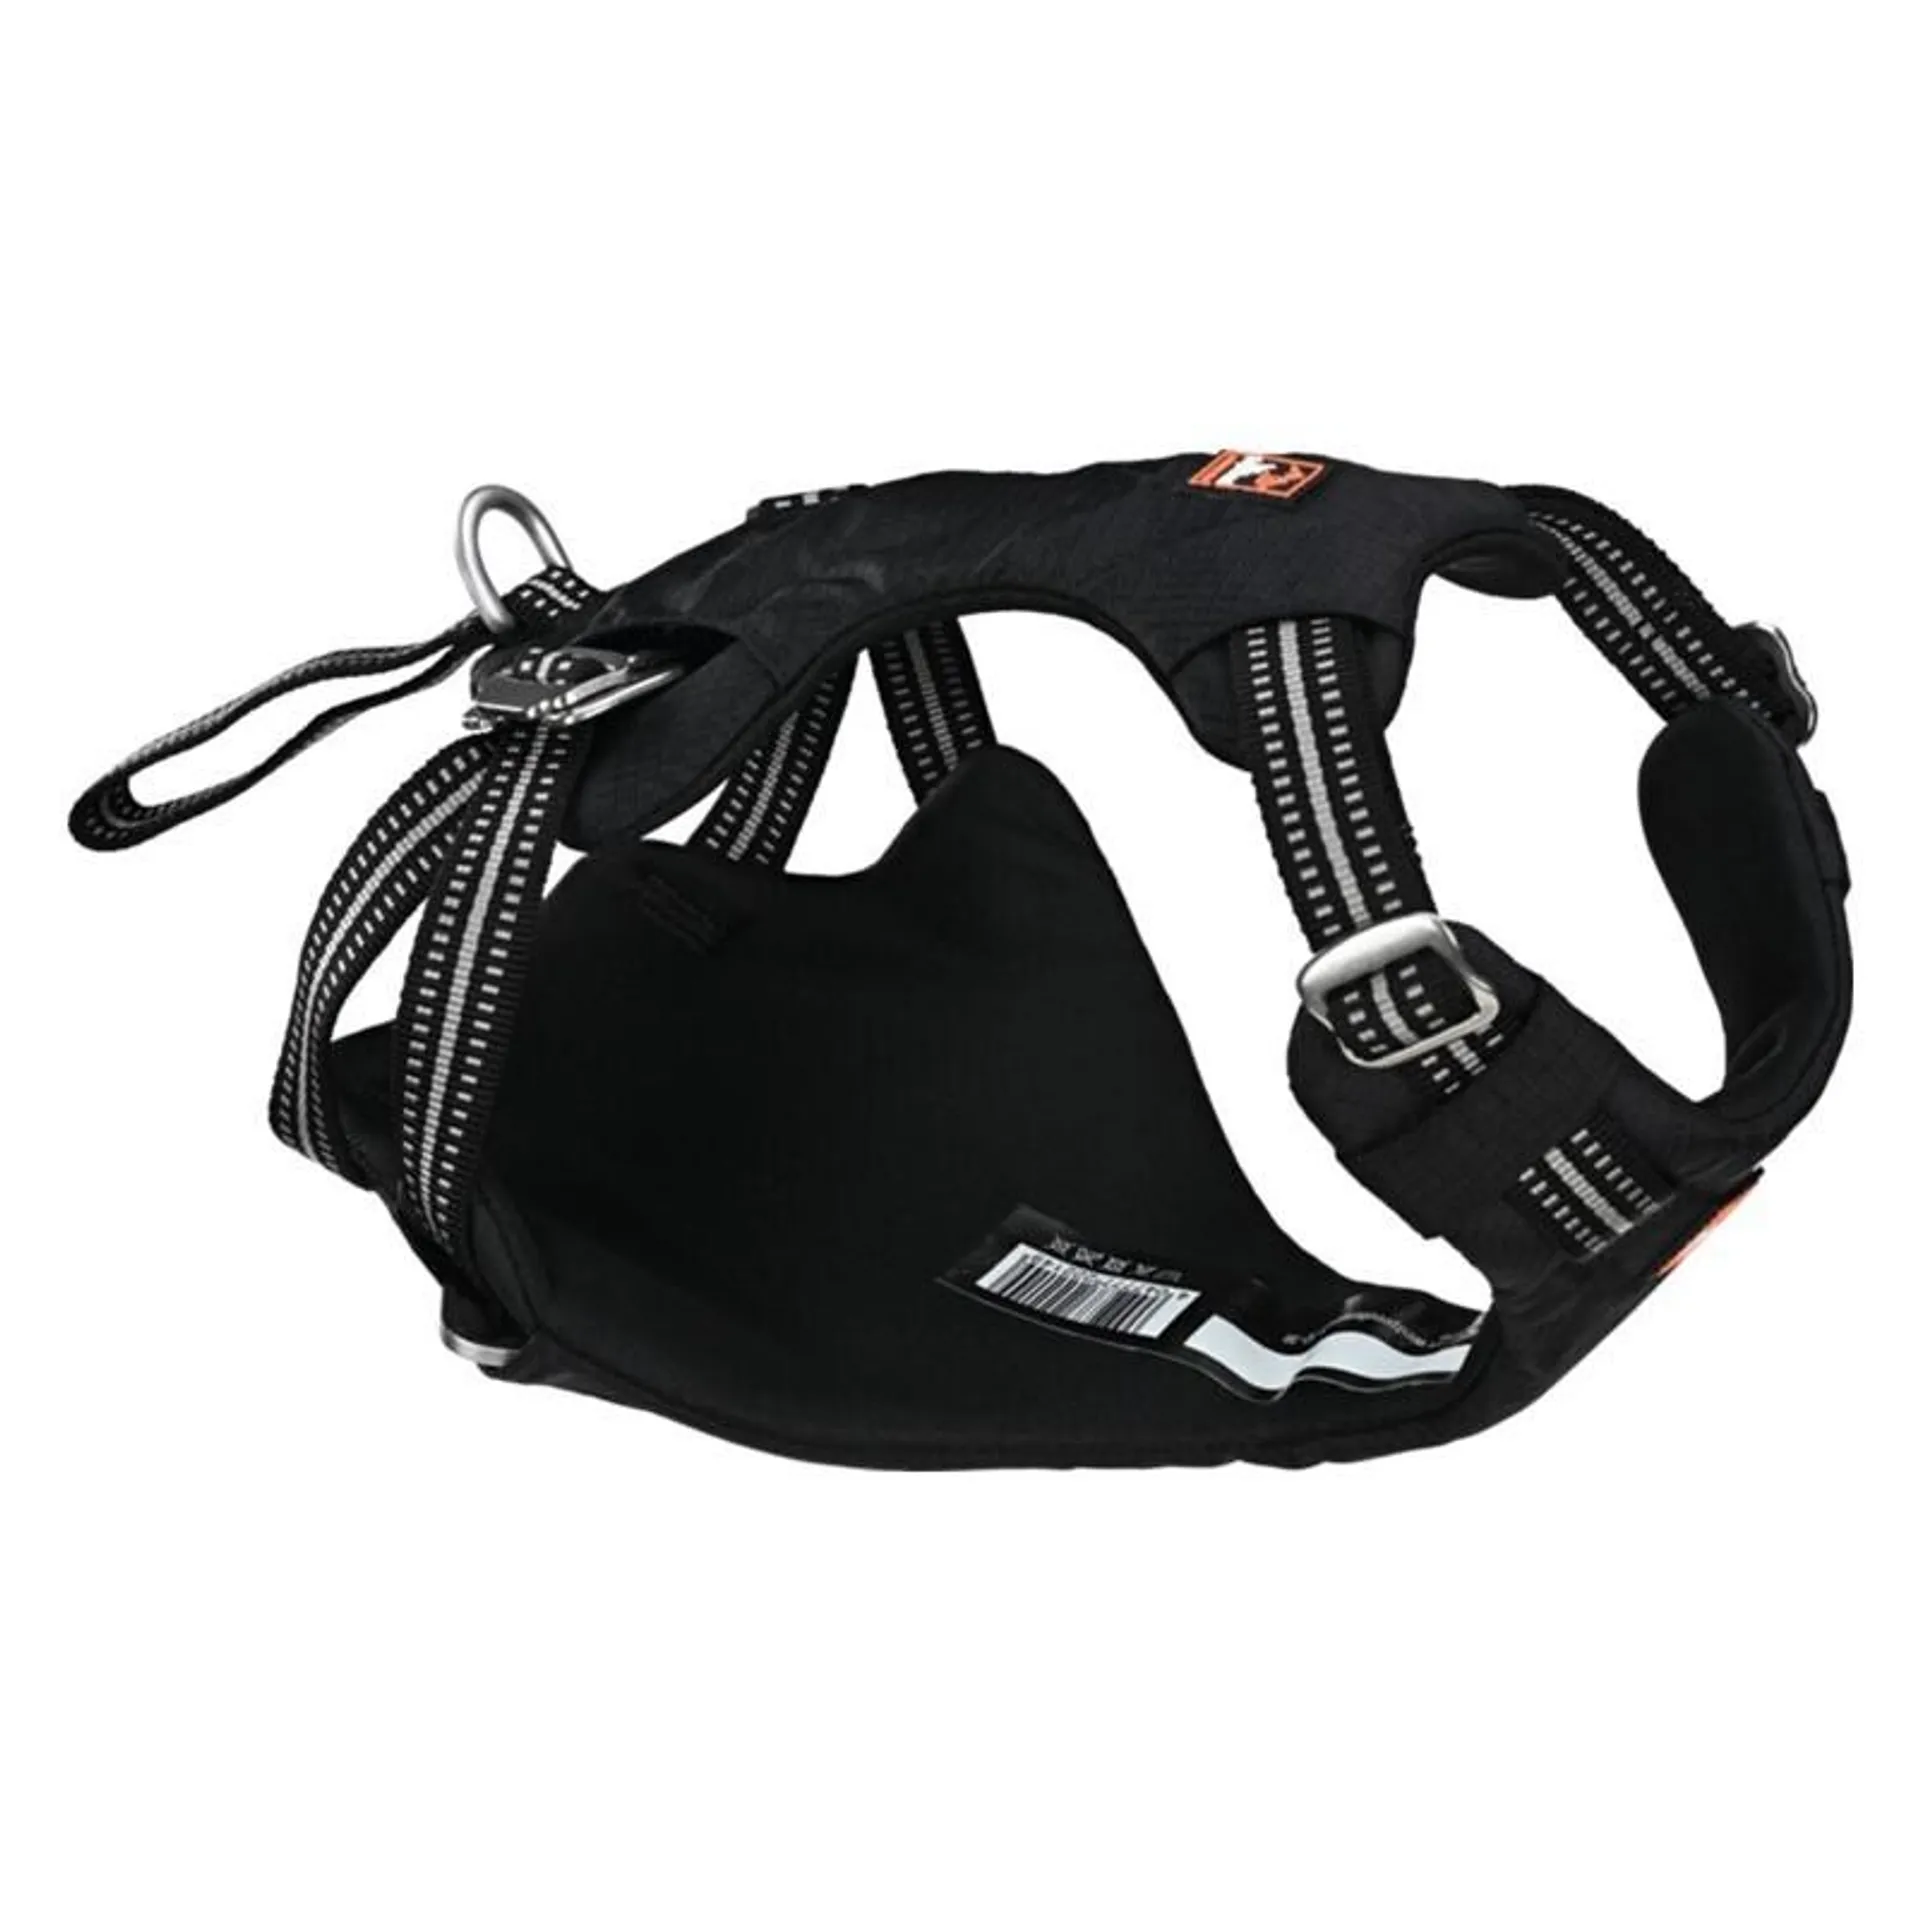 Dogs Creek Renegade safety harness XS